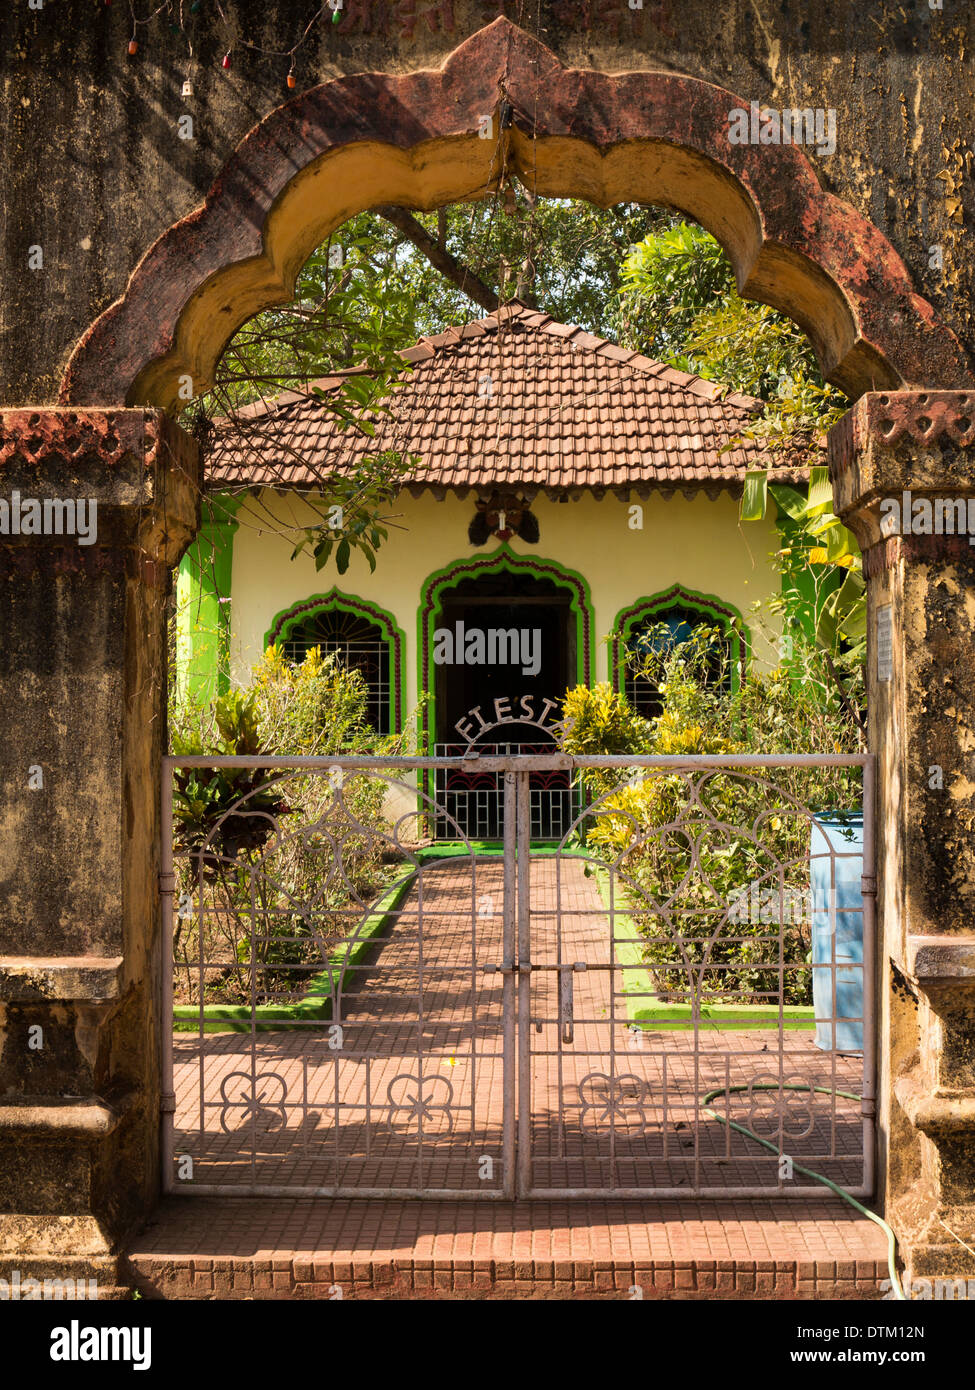 India, Goa, Chapora, Fiesta, green painted bungalow with mughal style archways Stock Photo